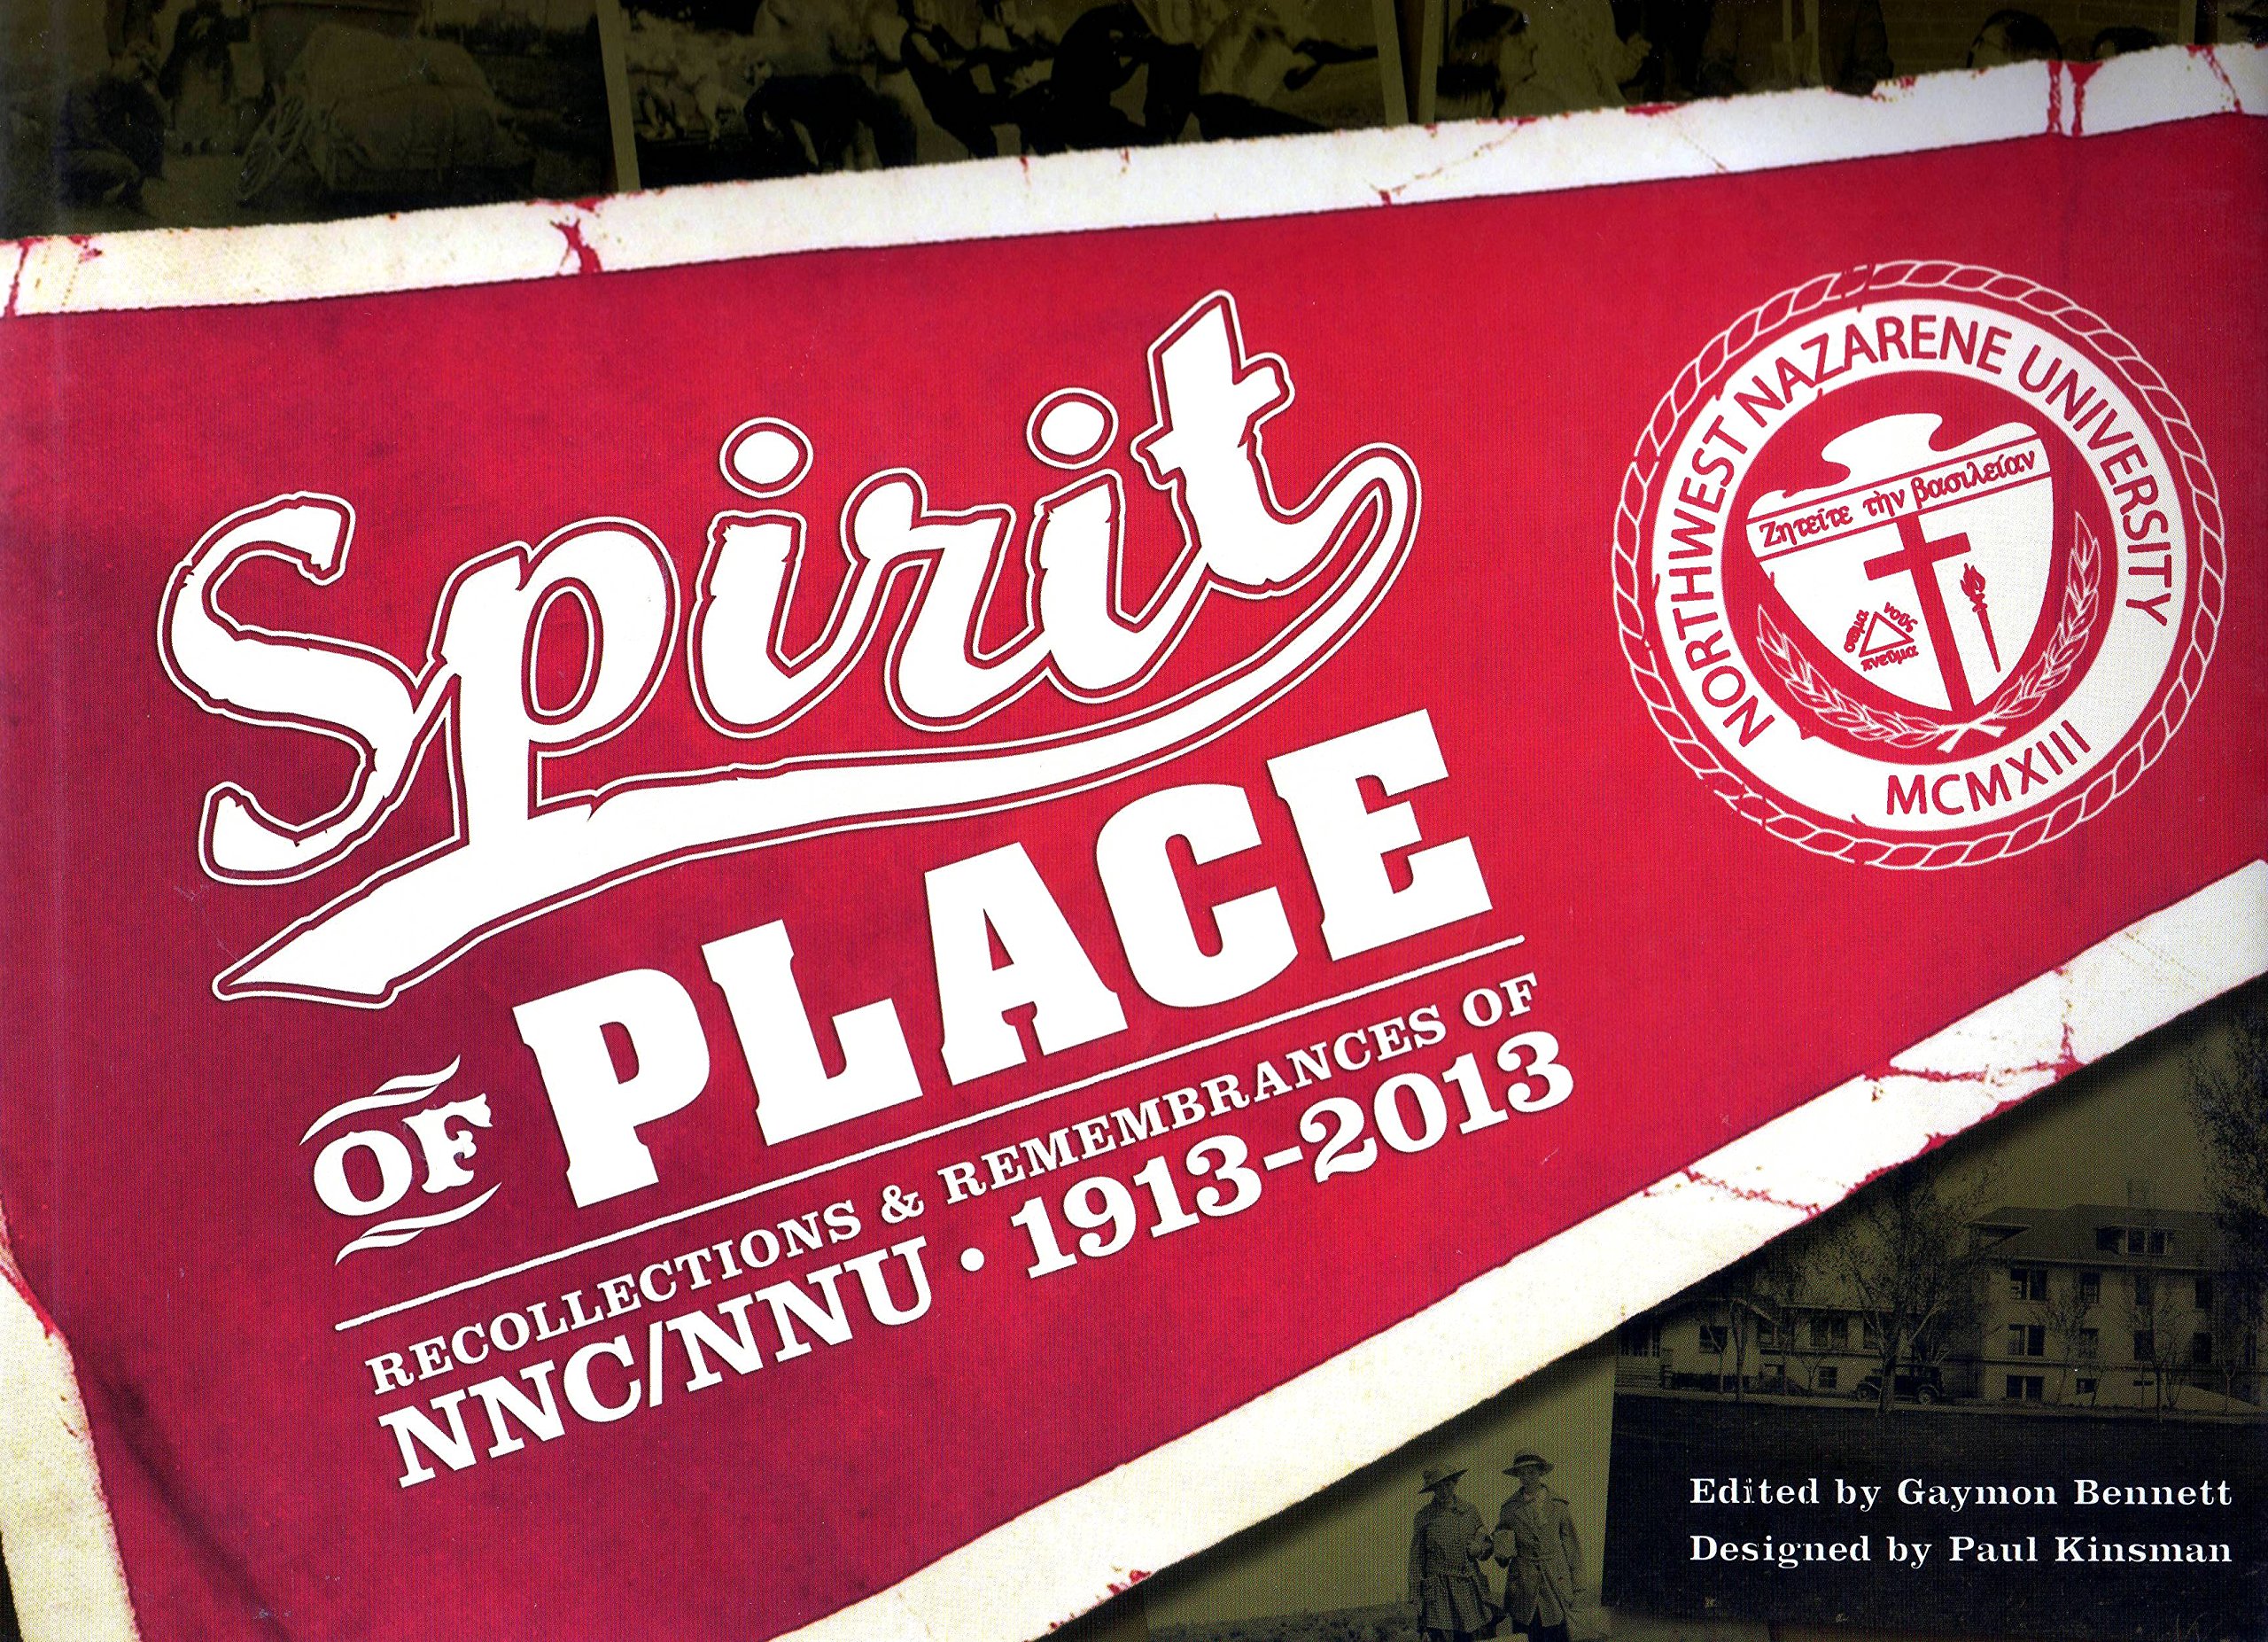 Spirit of place: Recollections & remembrances of NNC/NNU 1913-2013 (book cover)